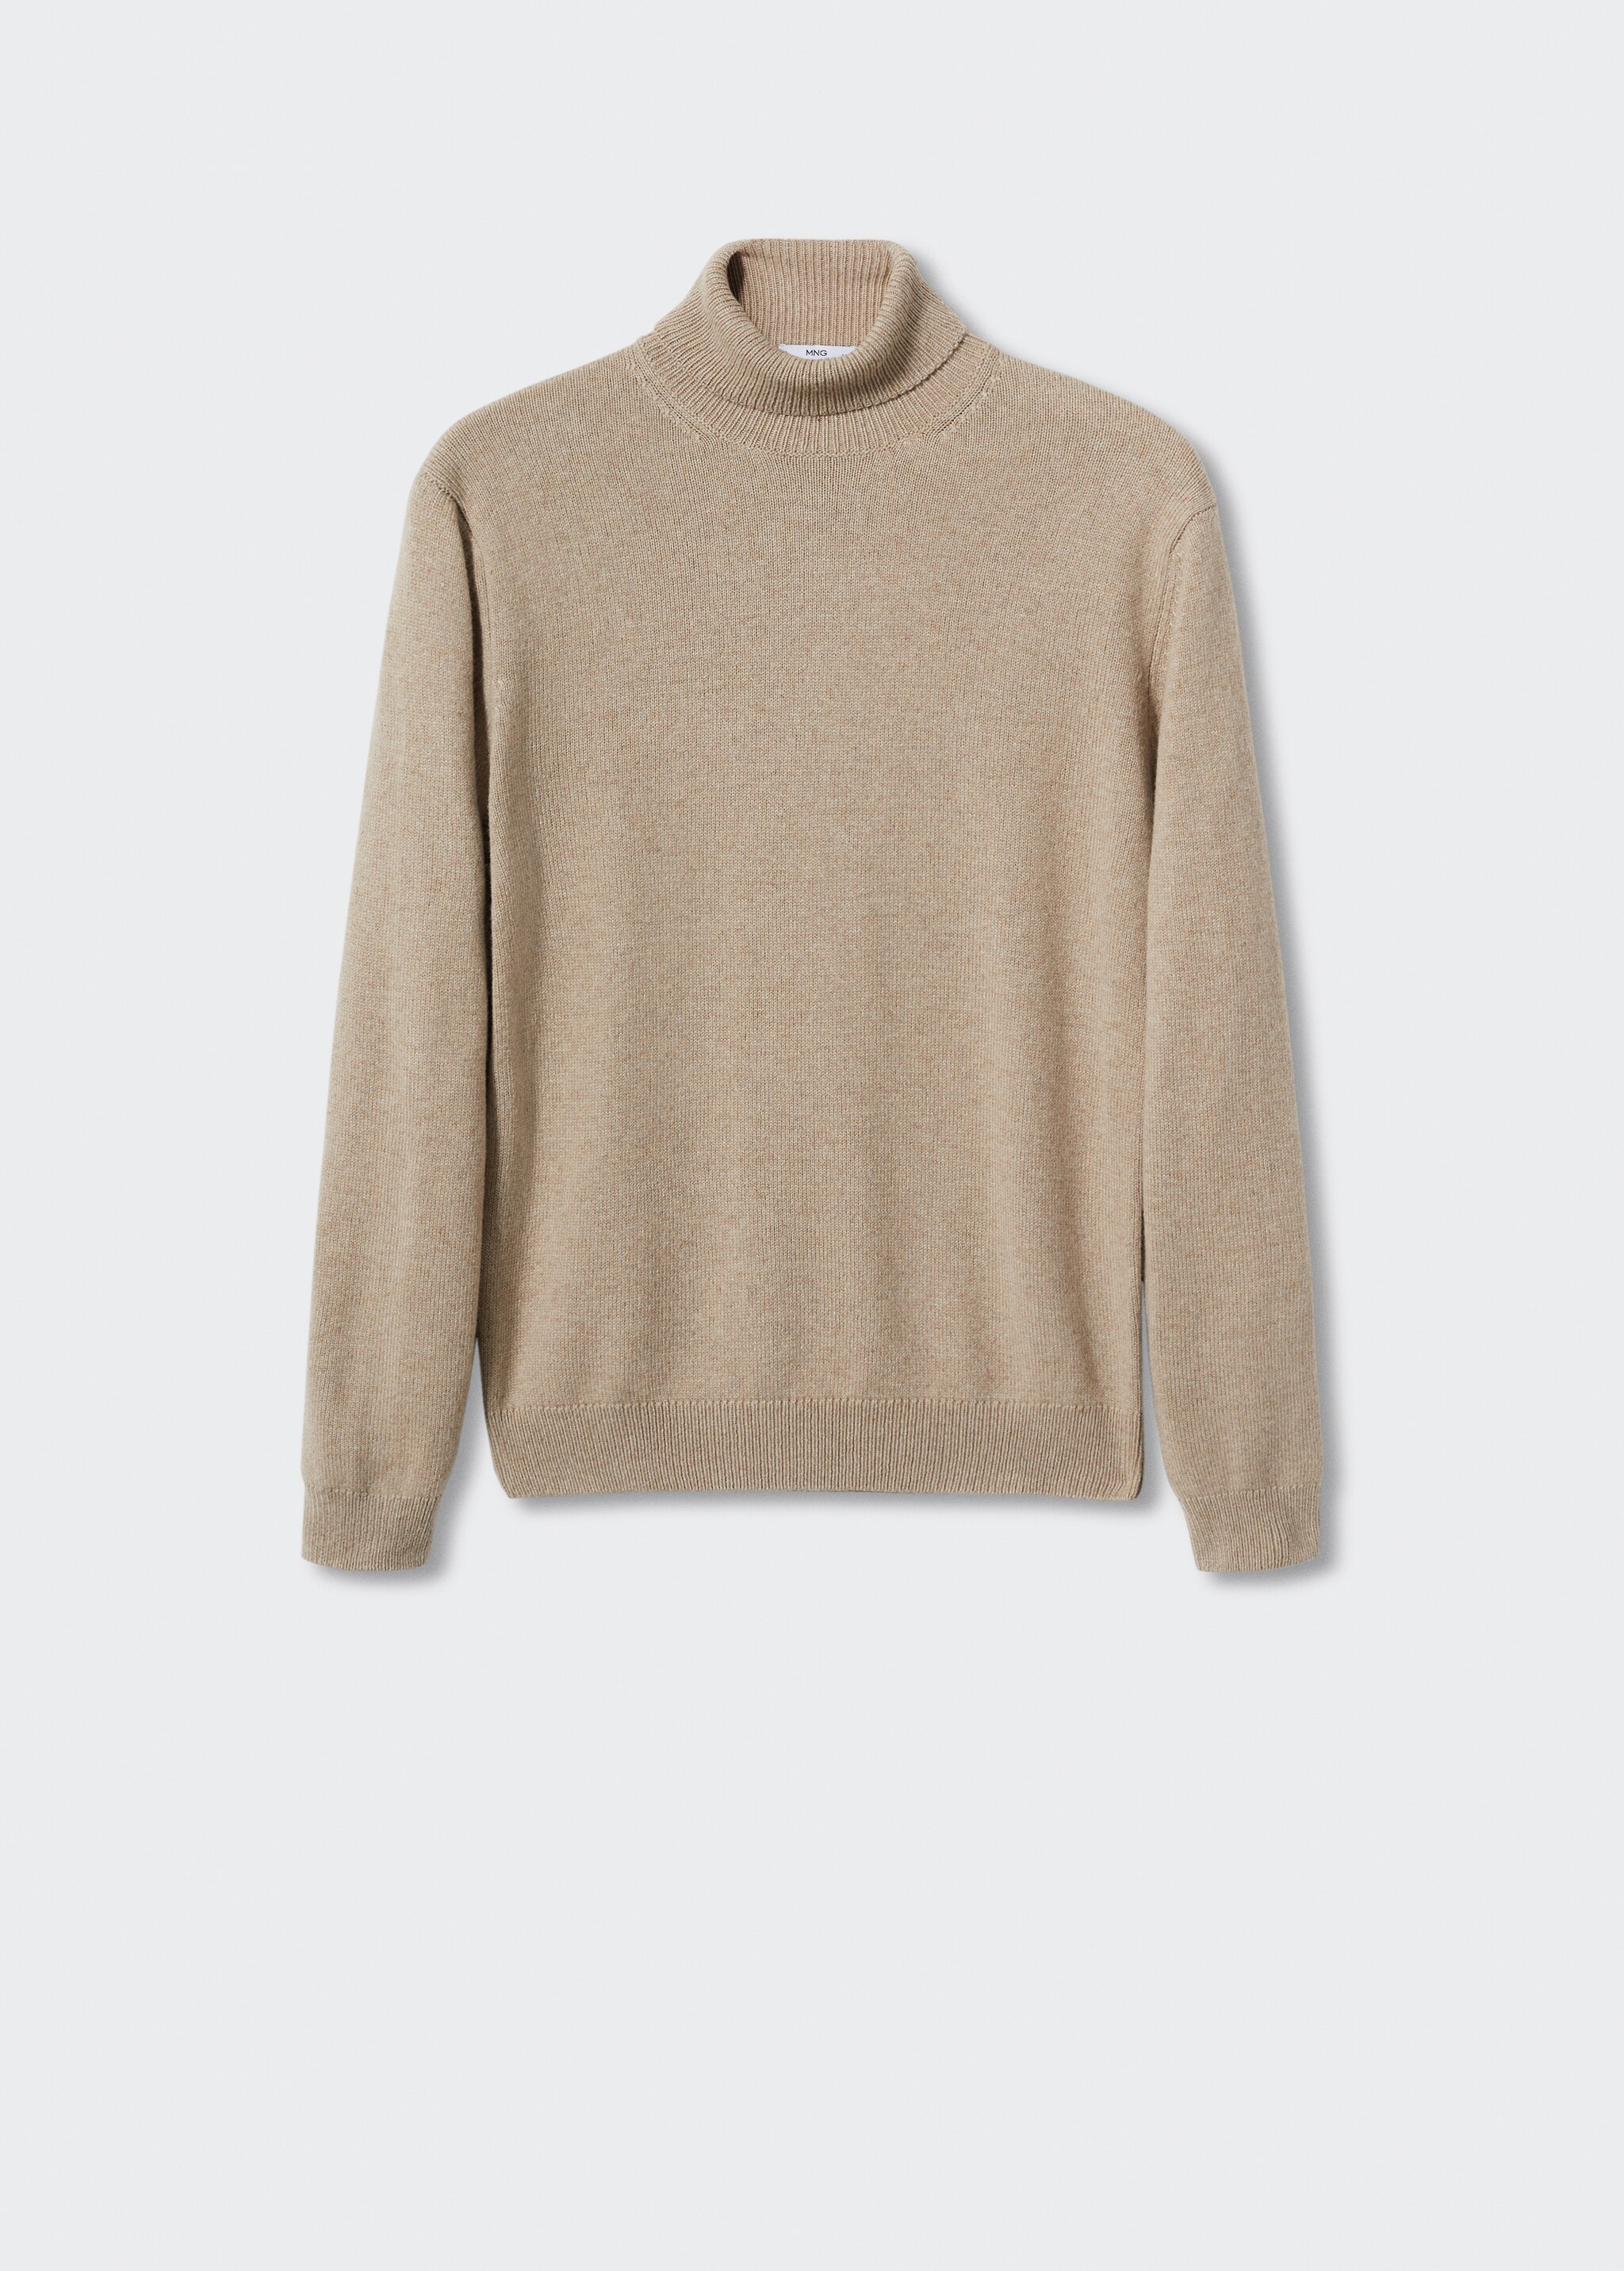 Turtleneck wool sweater - Article without model